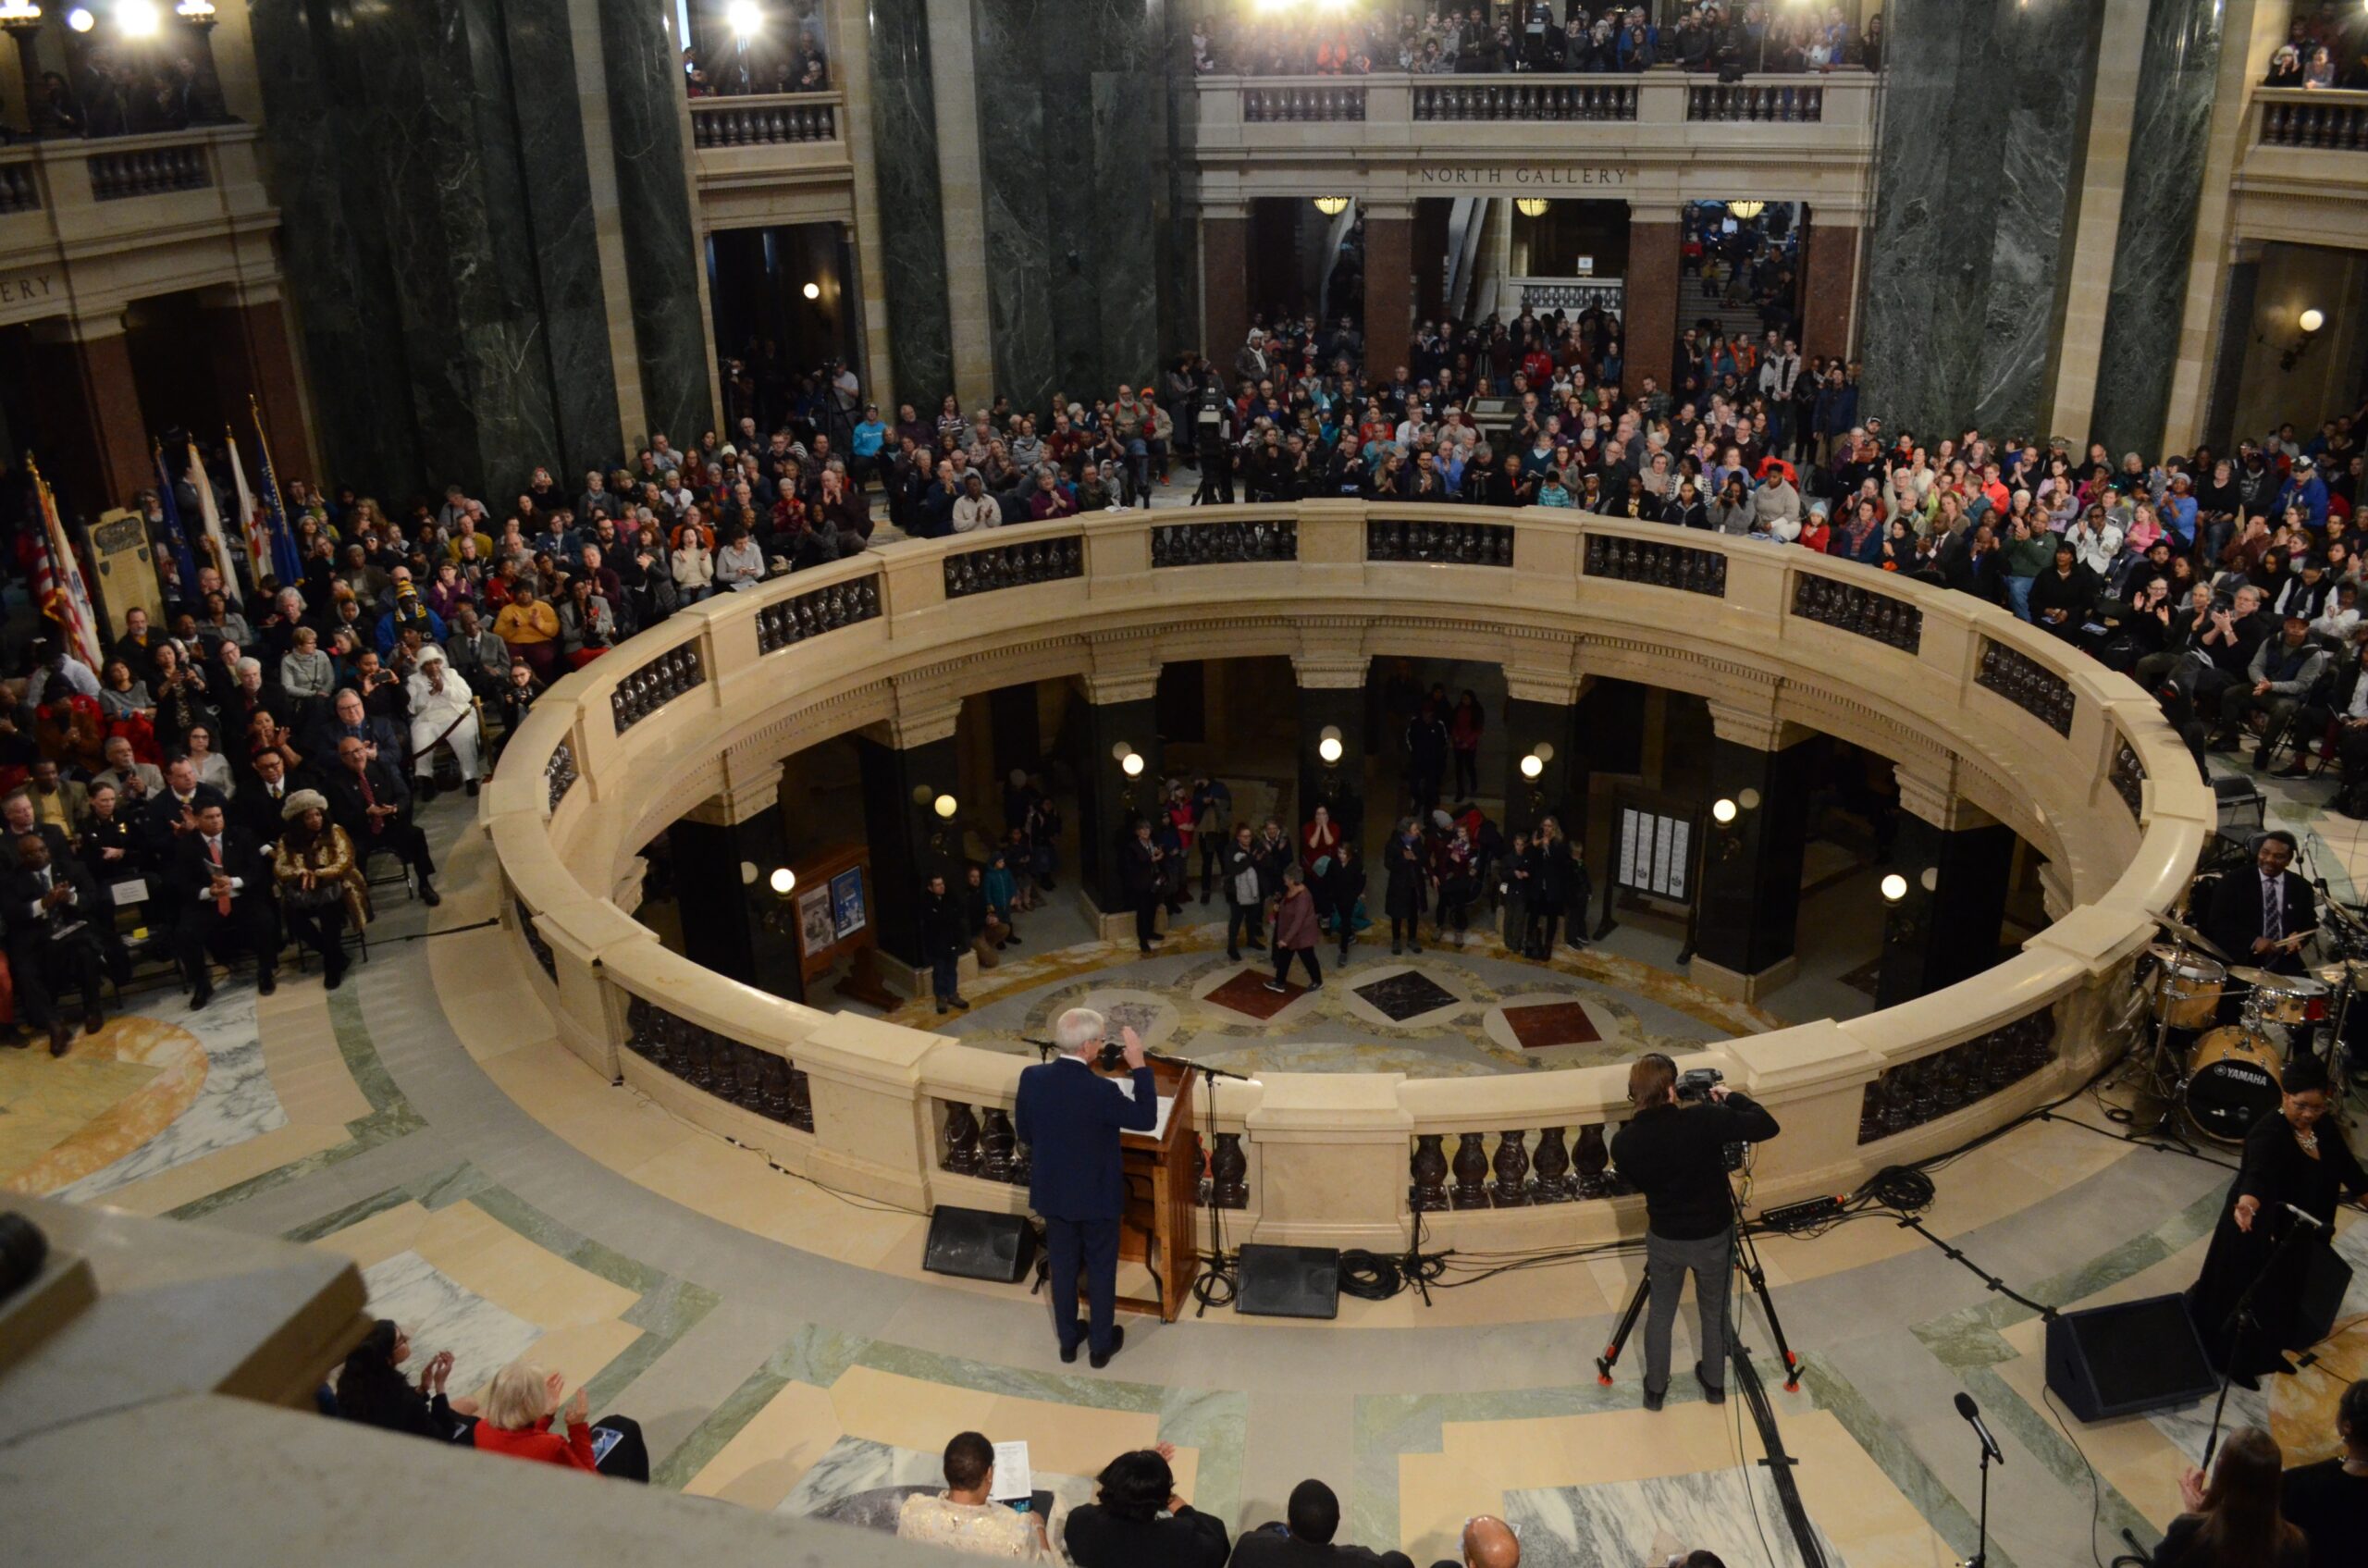 From above, you can see the governor standing at a podium. Across the balcony, hundreds of people listen.